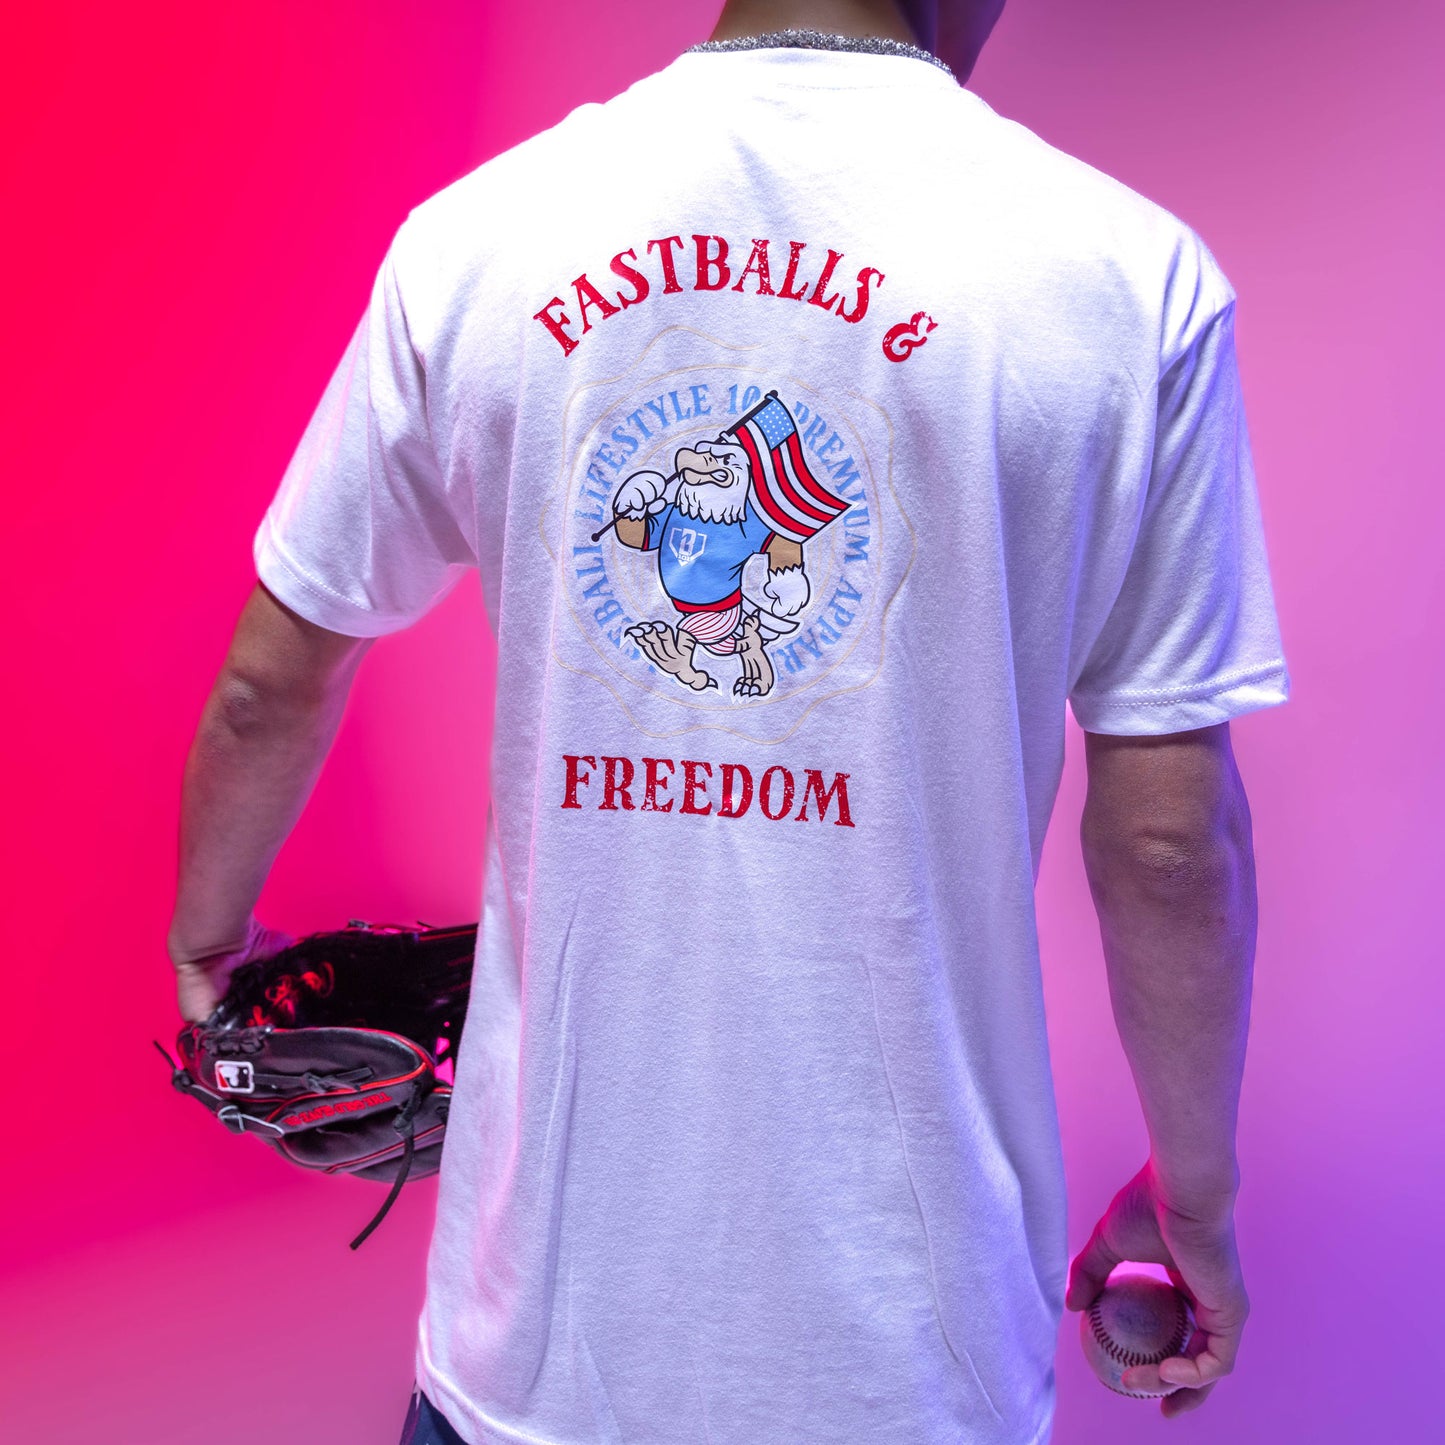 Fastballs & Freedom Youth Tee